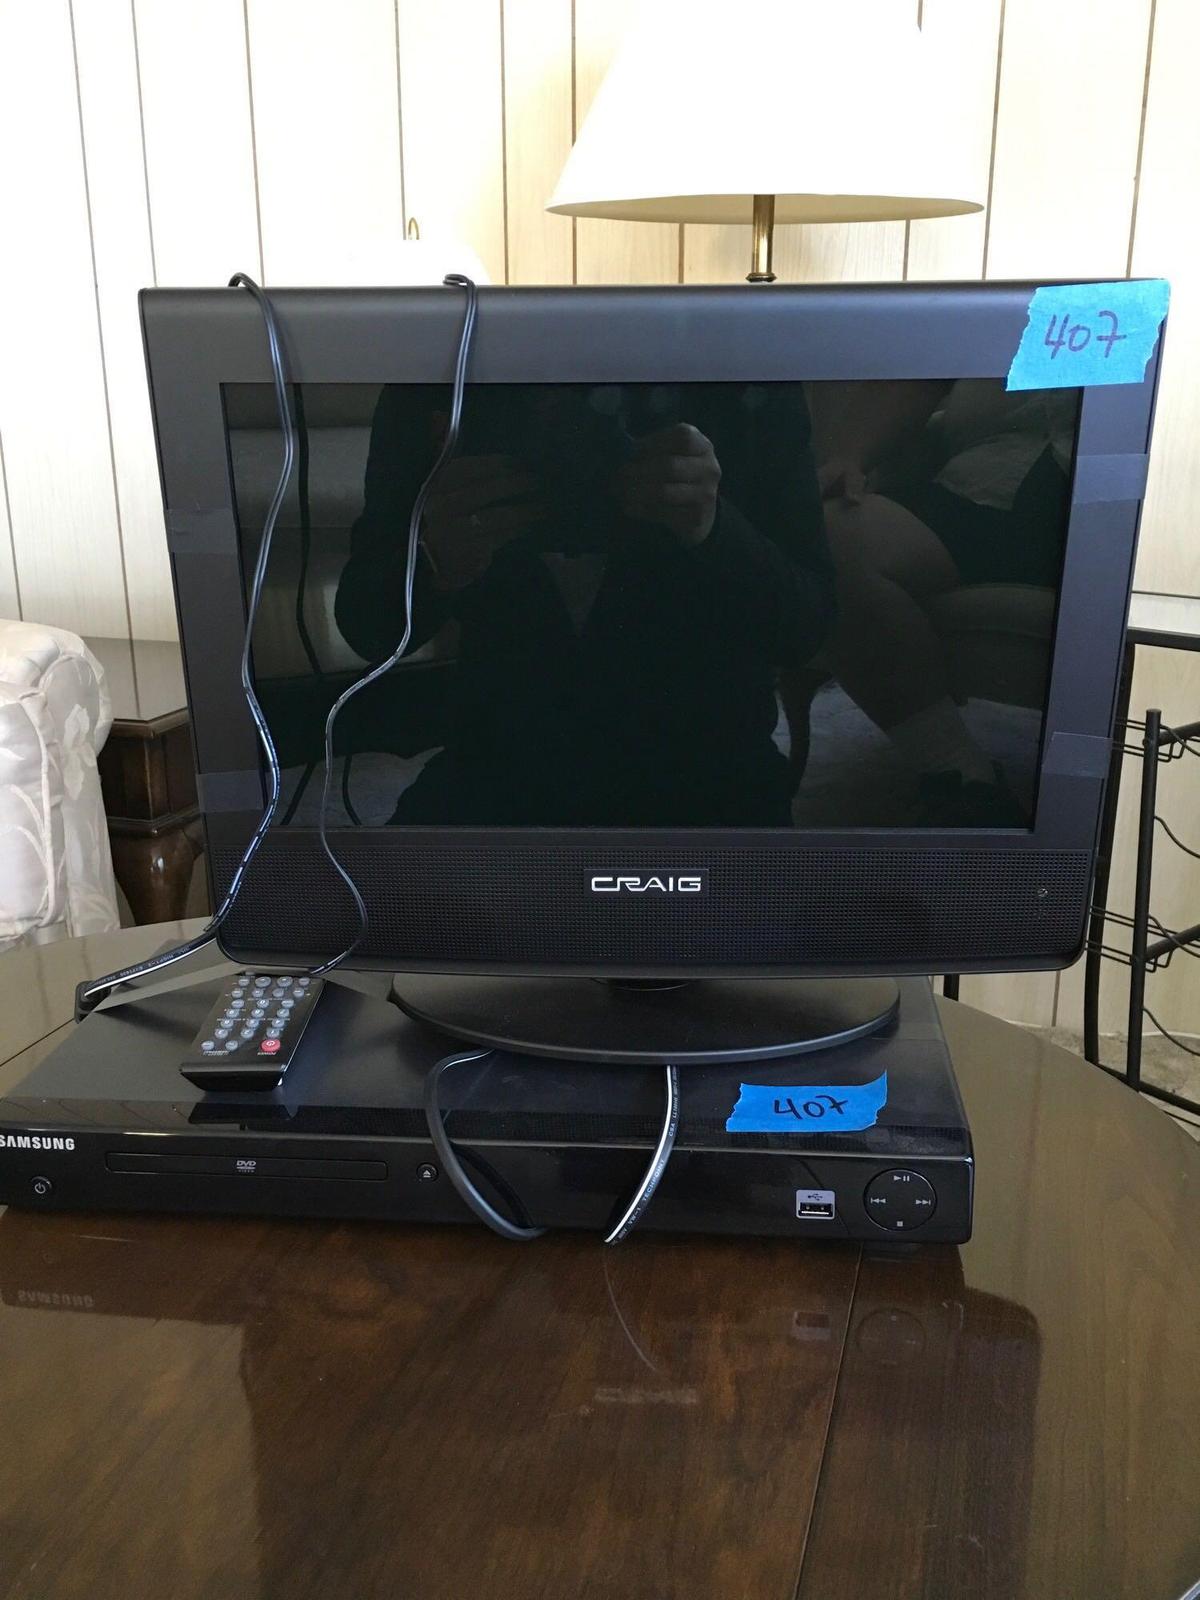 Craig 14" TV with remote and Samsung DVD player with remote